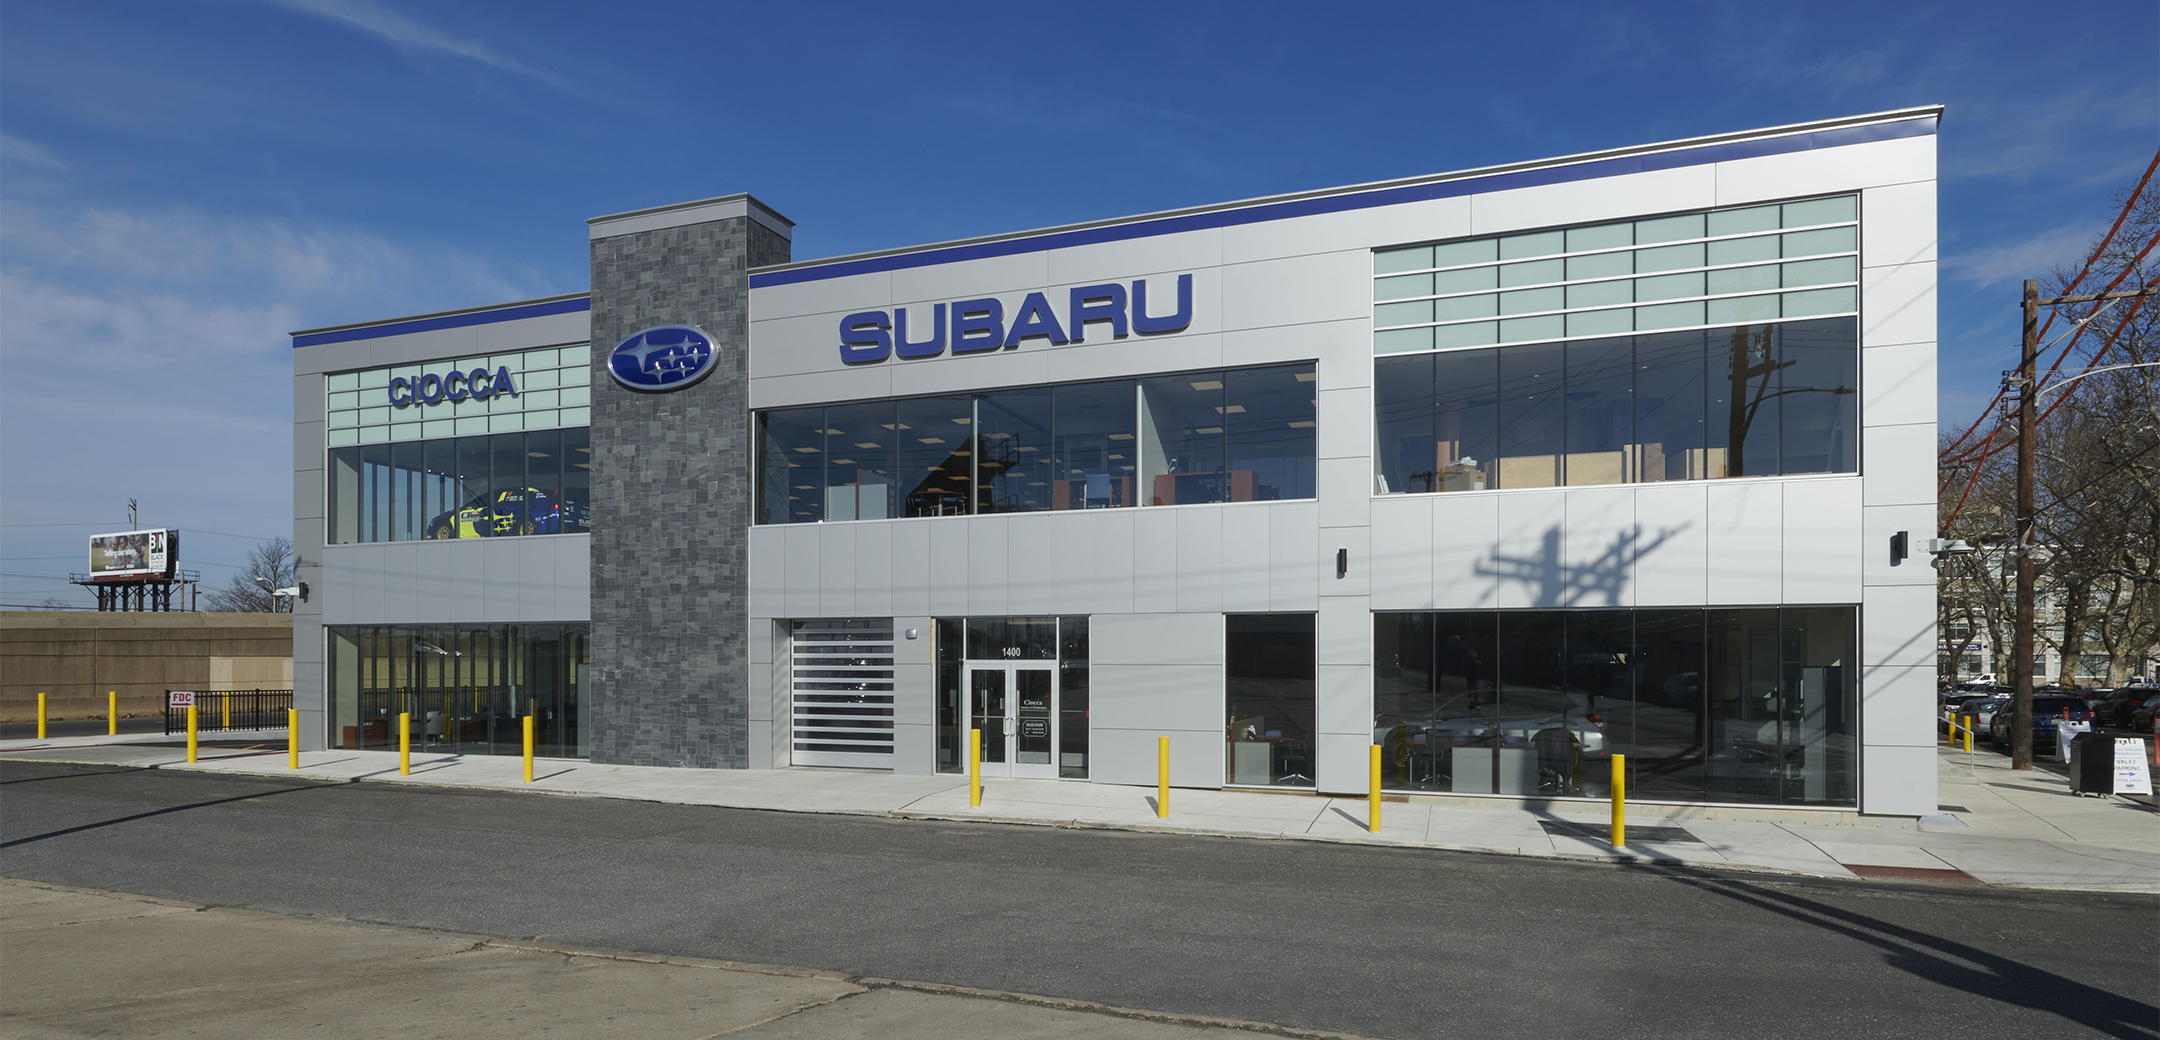 An exterior view of the Ciocca Subaru building showcasing the "Subaru" signage, logo, side street and front entrance door.